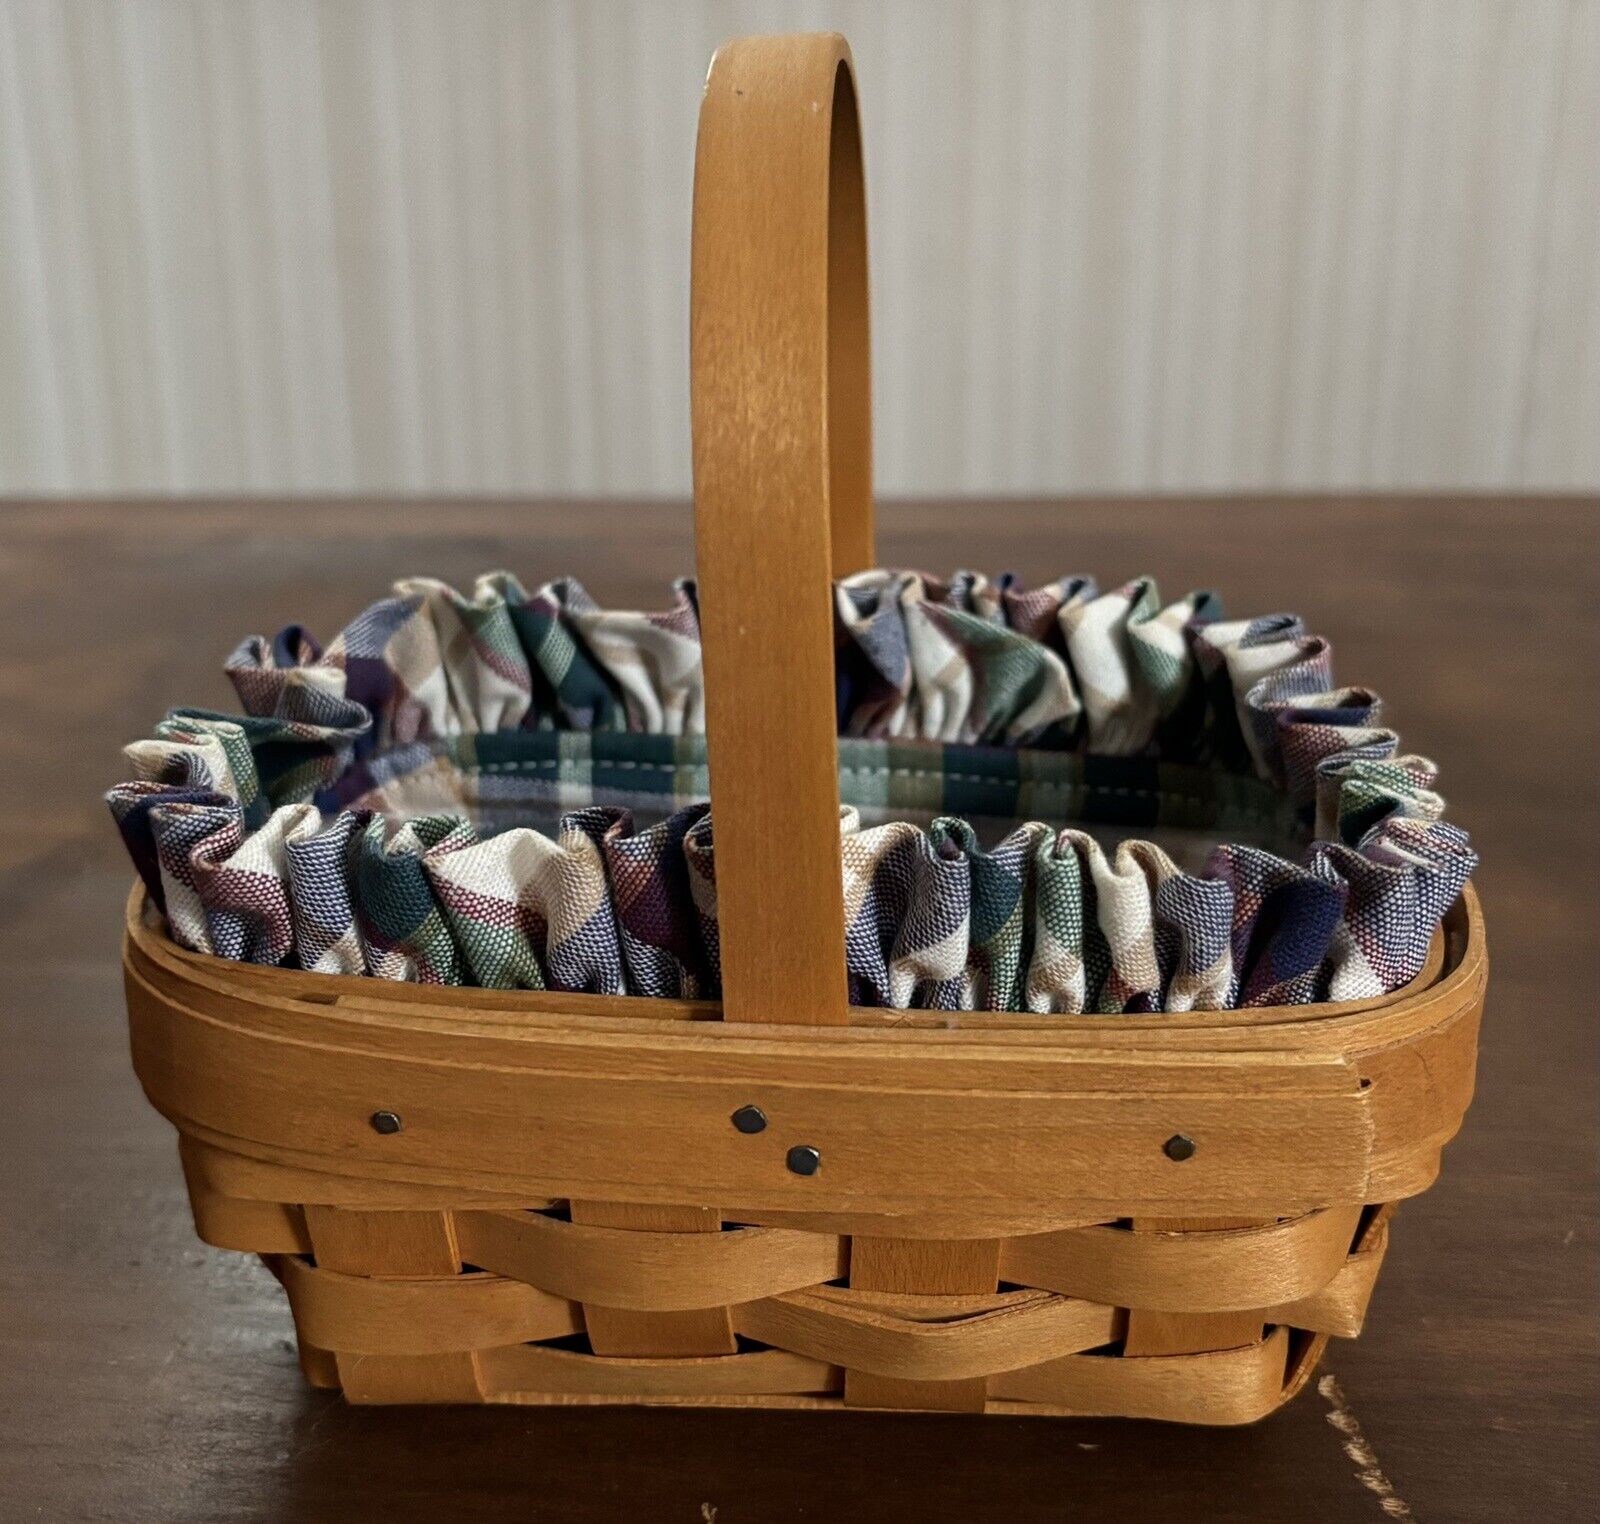 Preowned VINTAGE 2001 Longaberger Basket With Multicolored Liner.